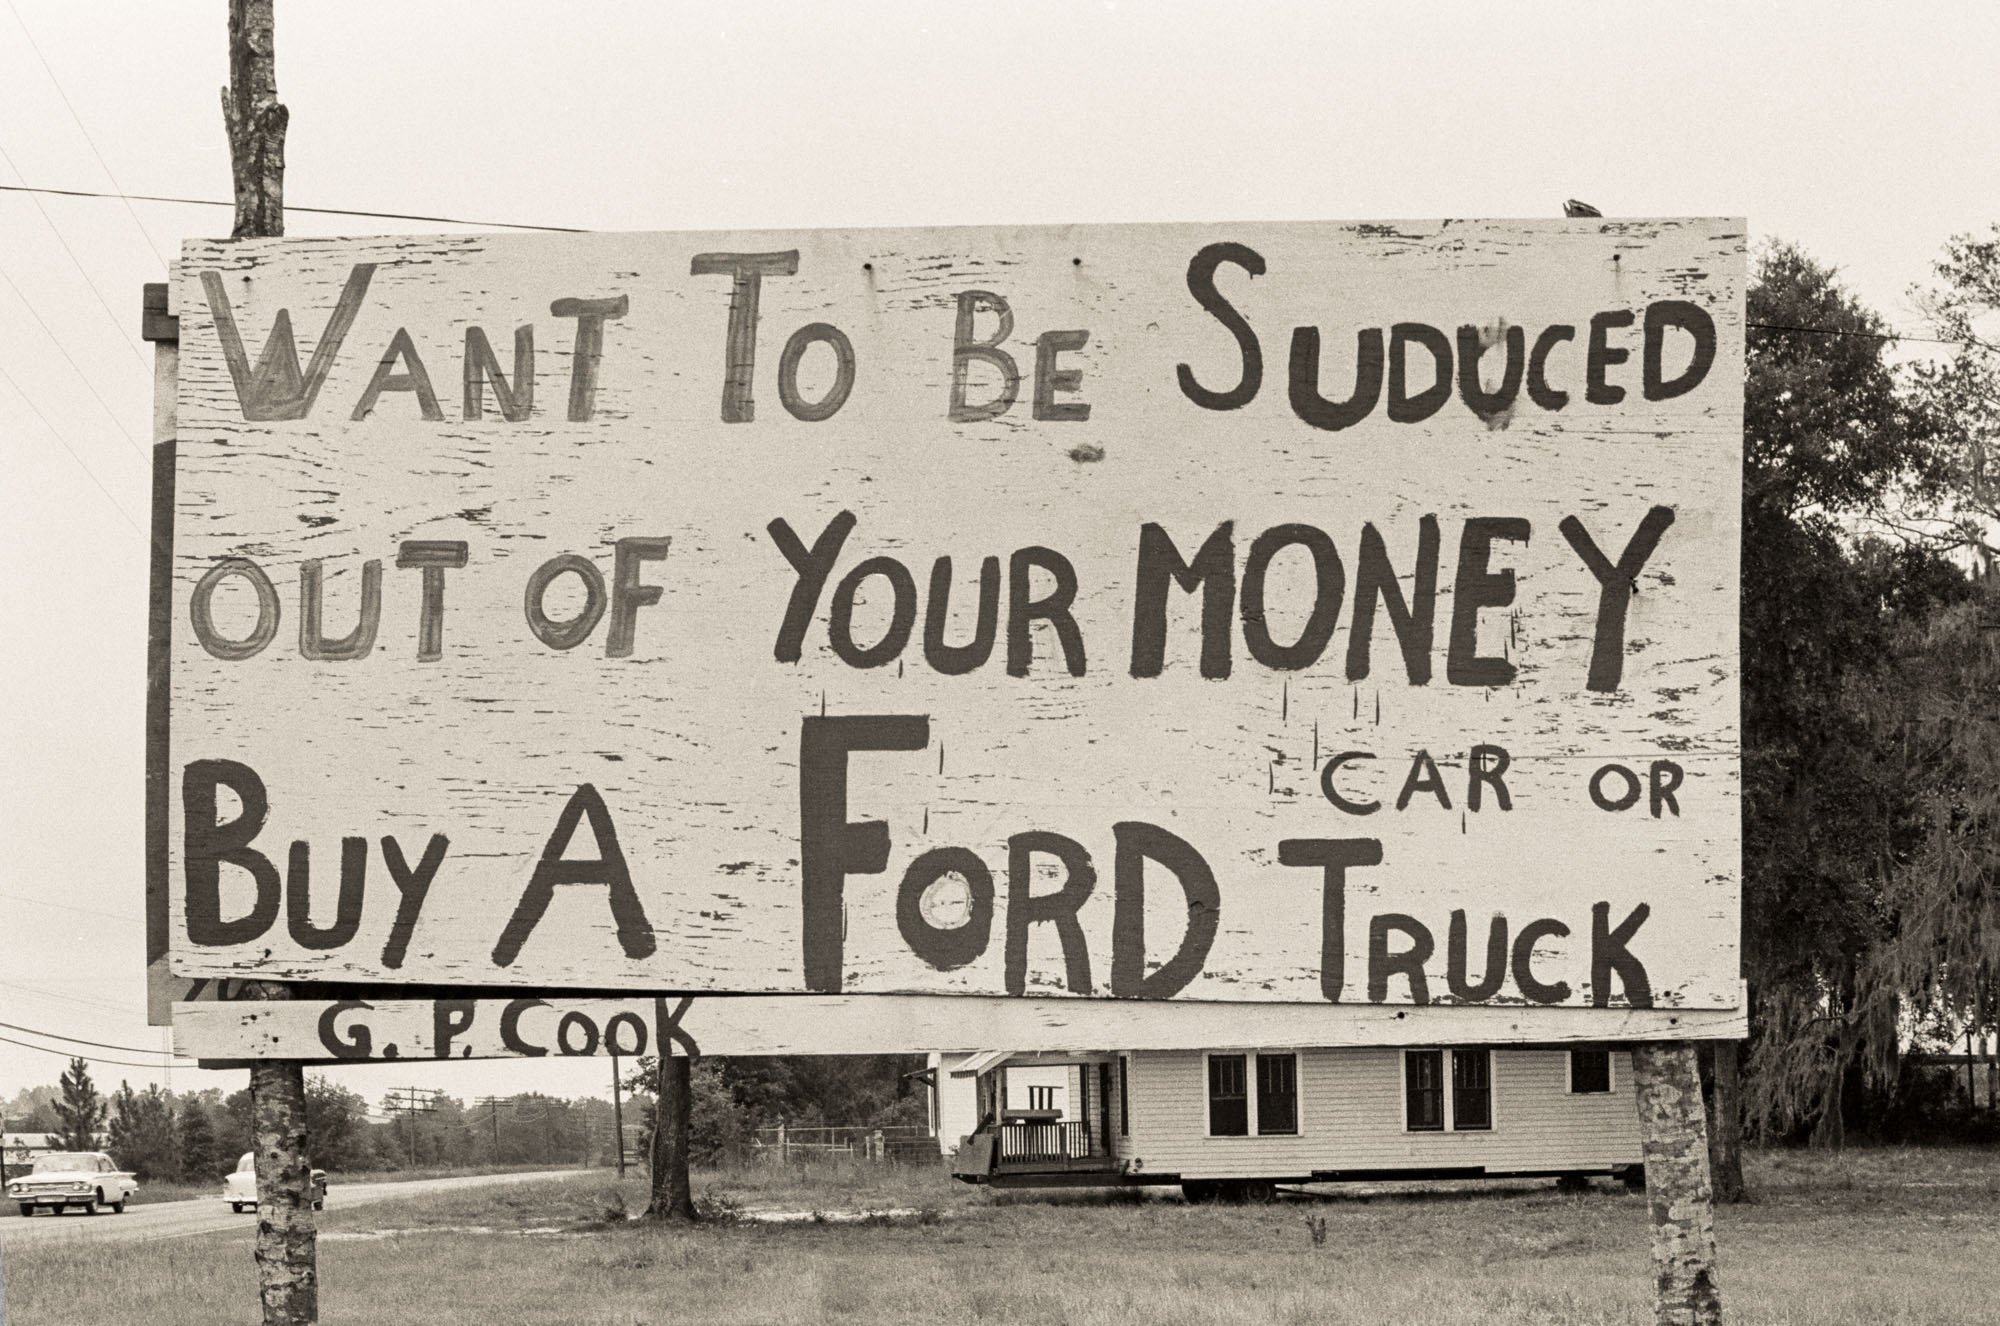 Suduced by Ford